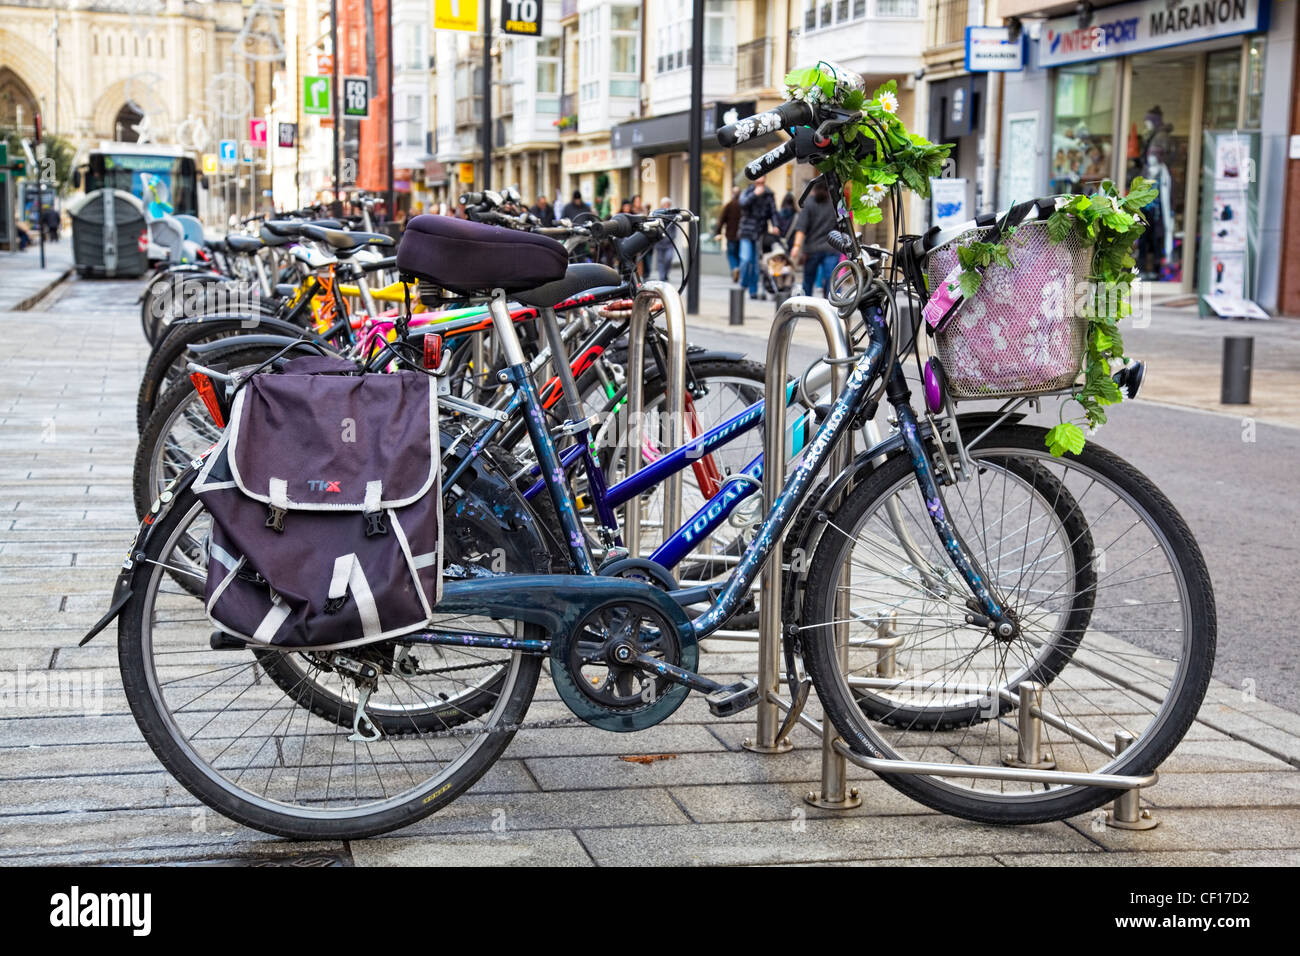 Bicycles parked in an urban view Stock Photo